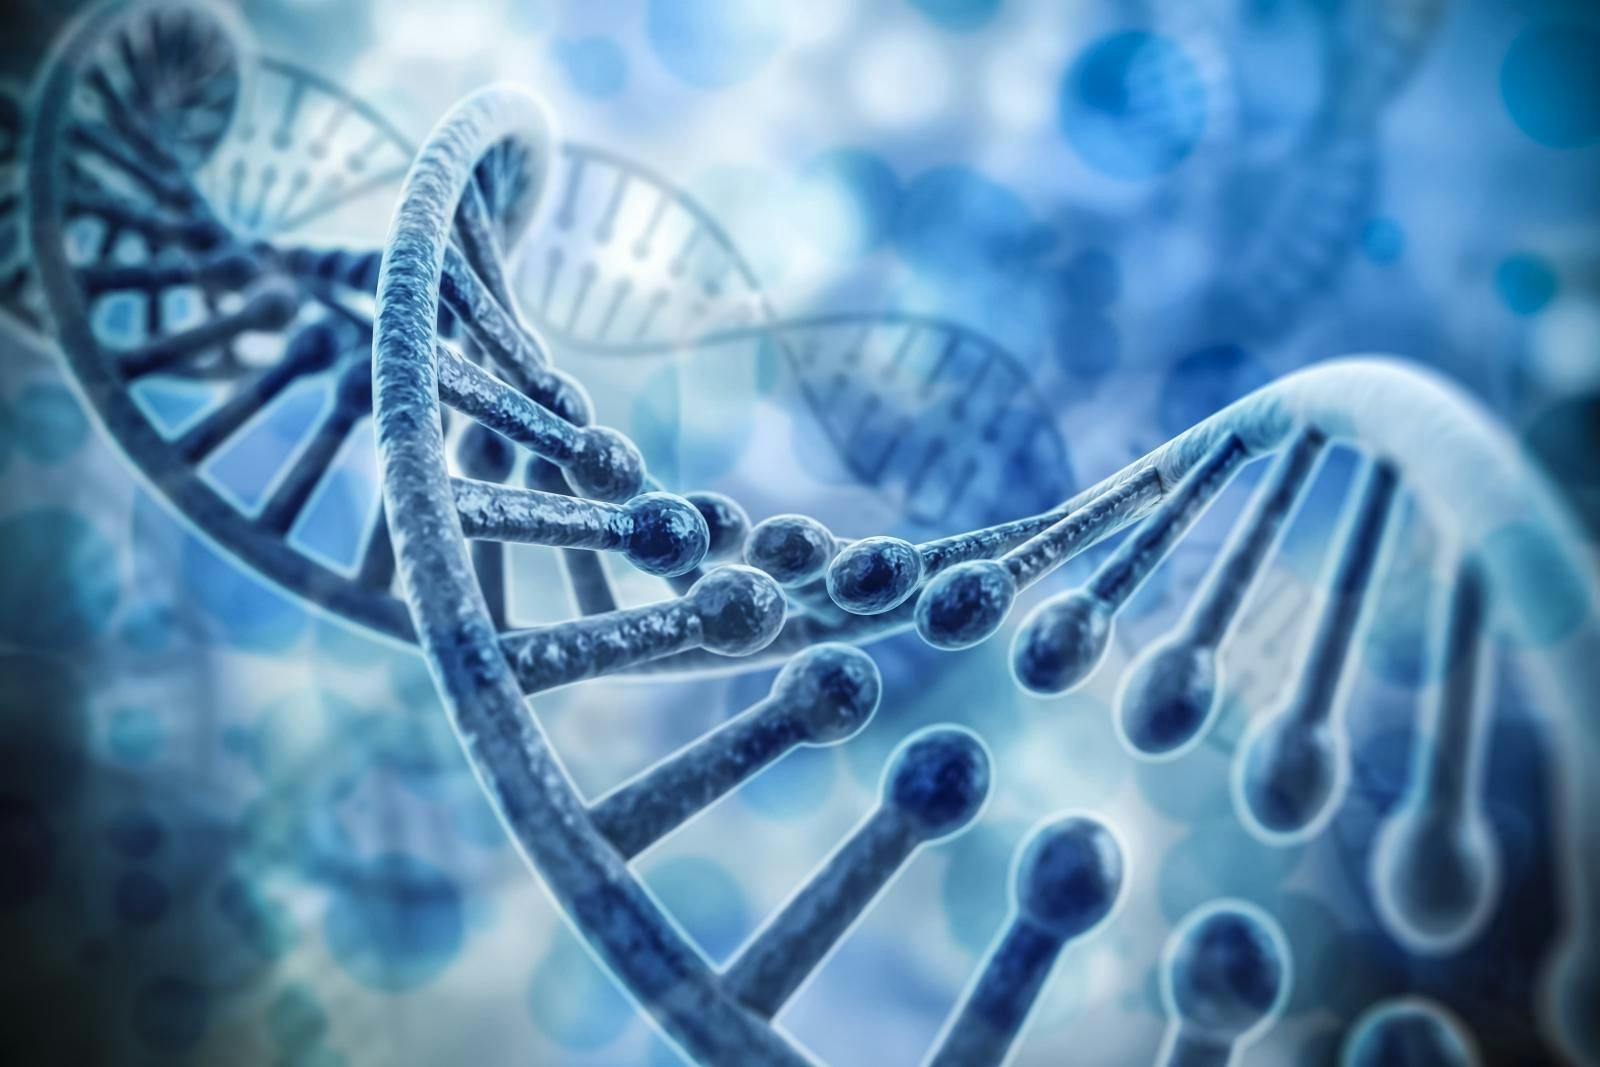 St. Jude Develops Gene Therapy for Severe Combined Immunodeficiency